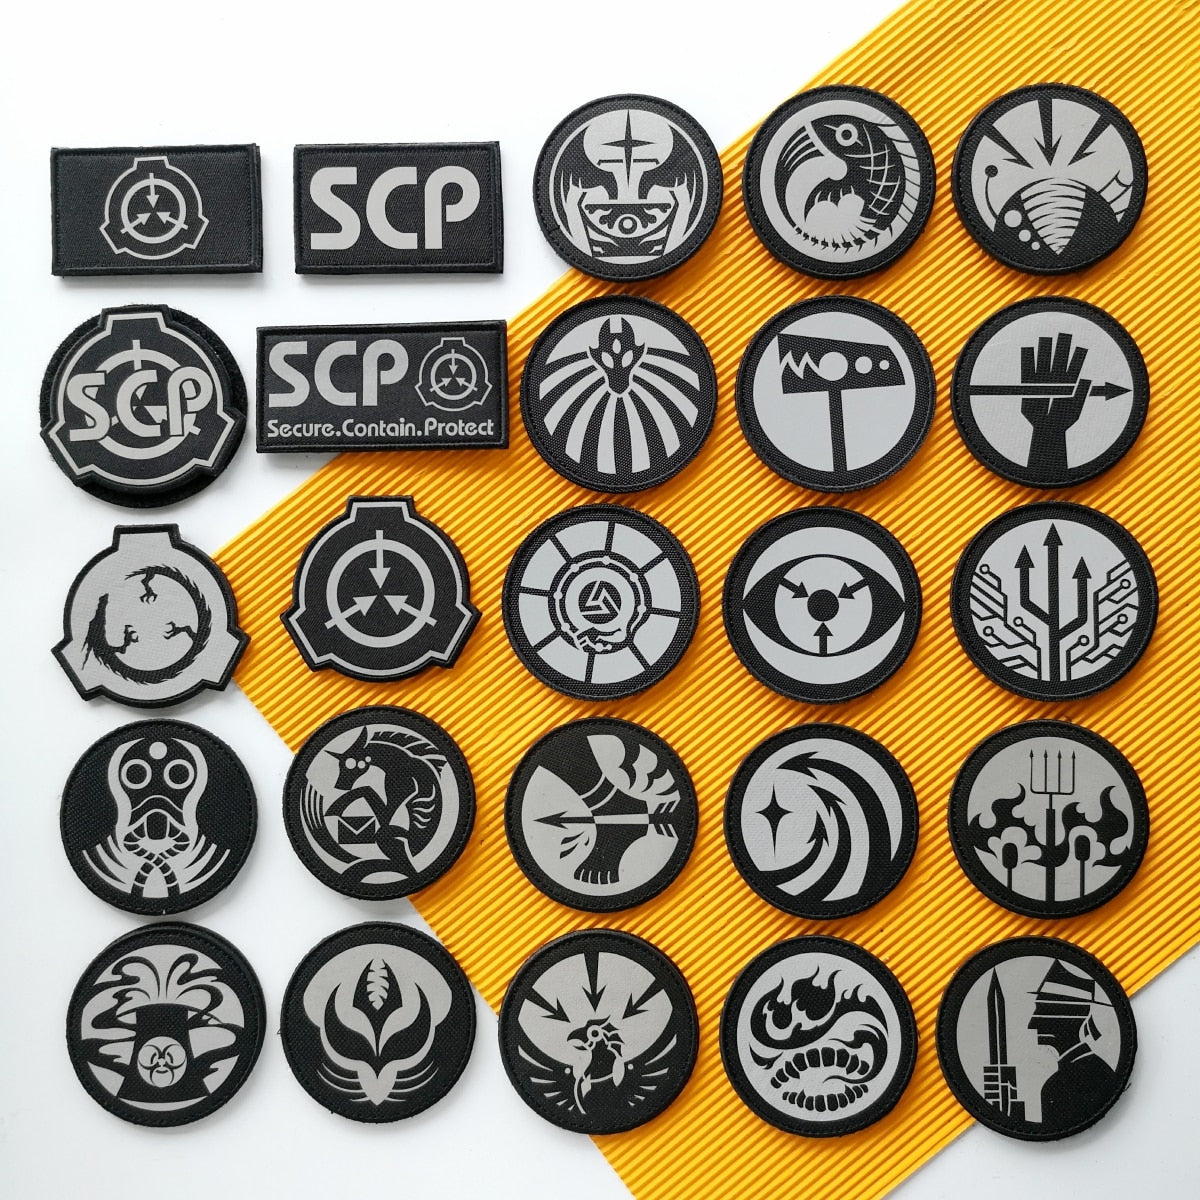  SCP Foundation Special Containment Procedures Foundation SCP  Mobile Task Forces Epsilon-11 “Nine-Tailed Fox” Military Hook Loop Tactics  Morale Reflective Patch